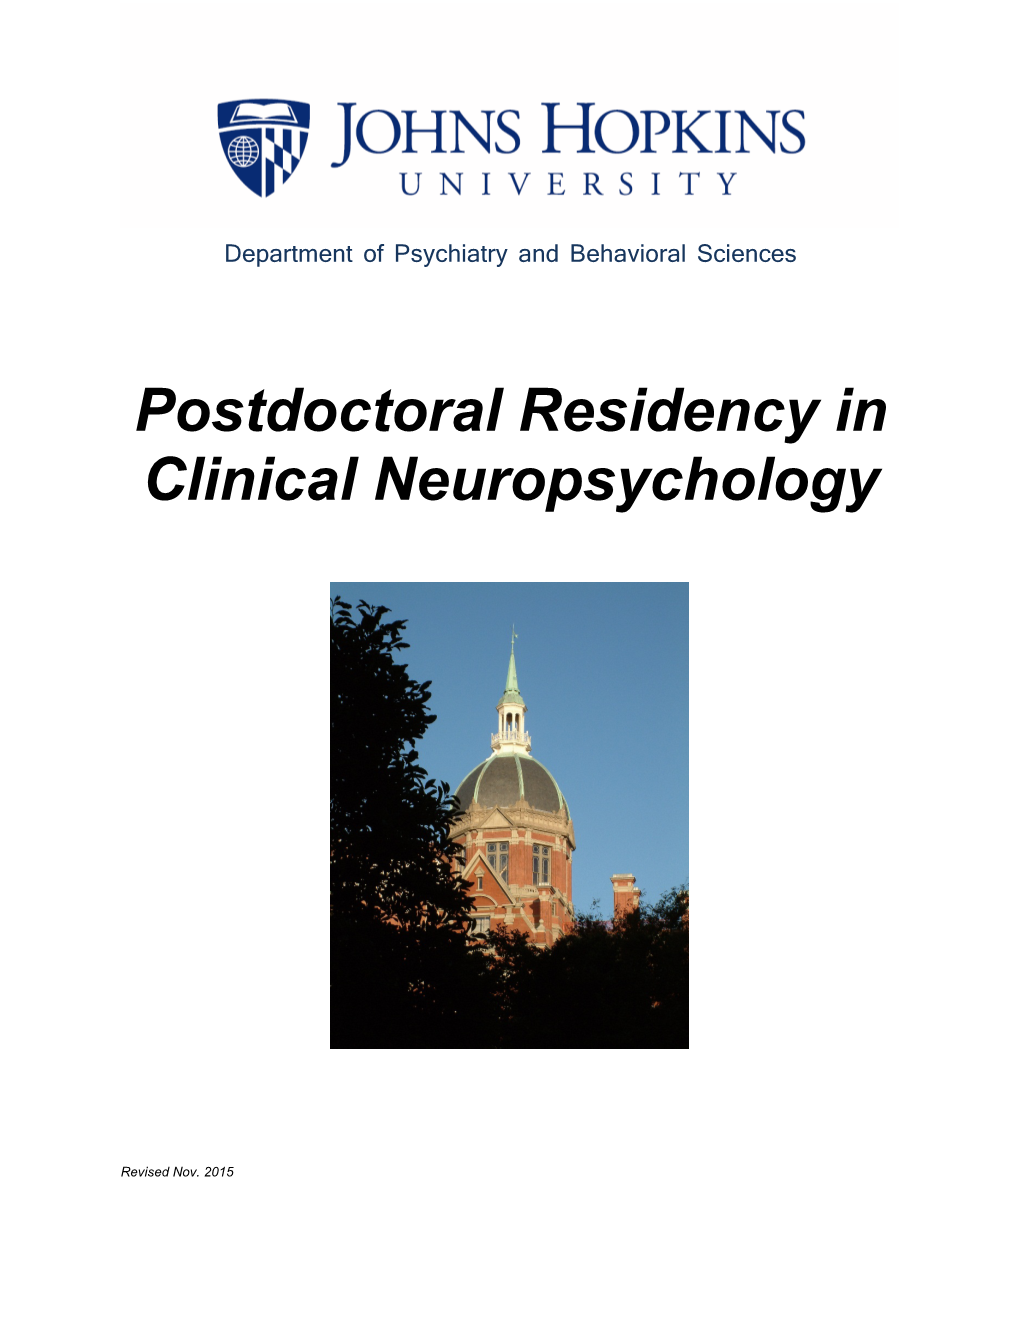 Postdoctoral Residency in Clinical Neuropsychology